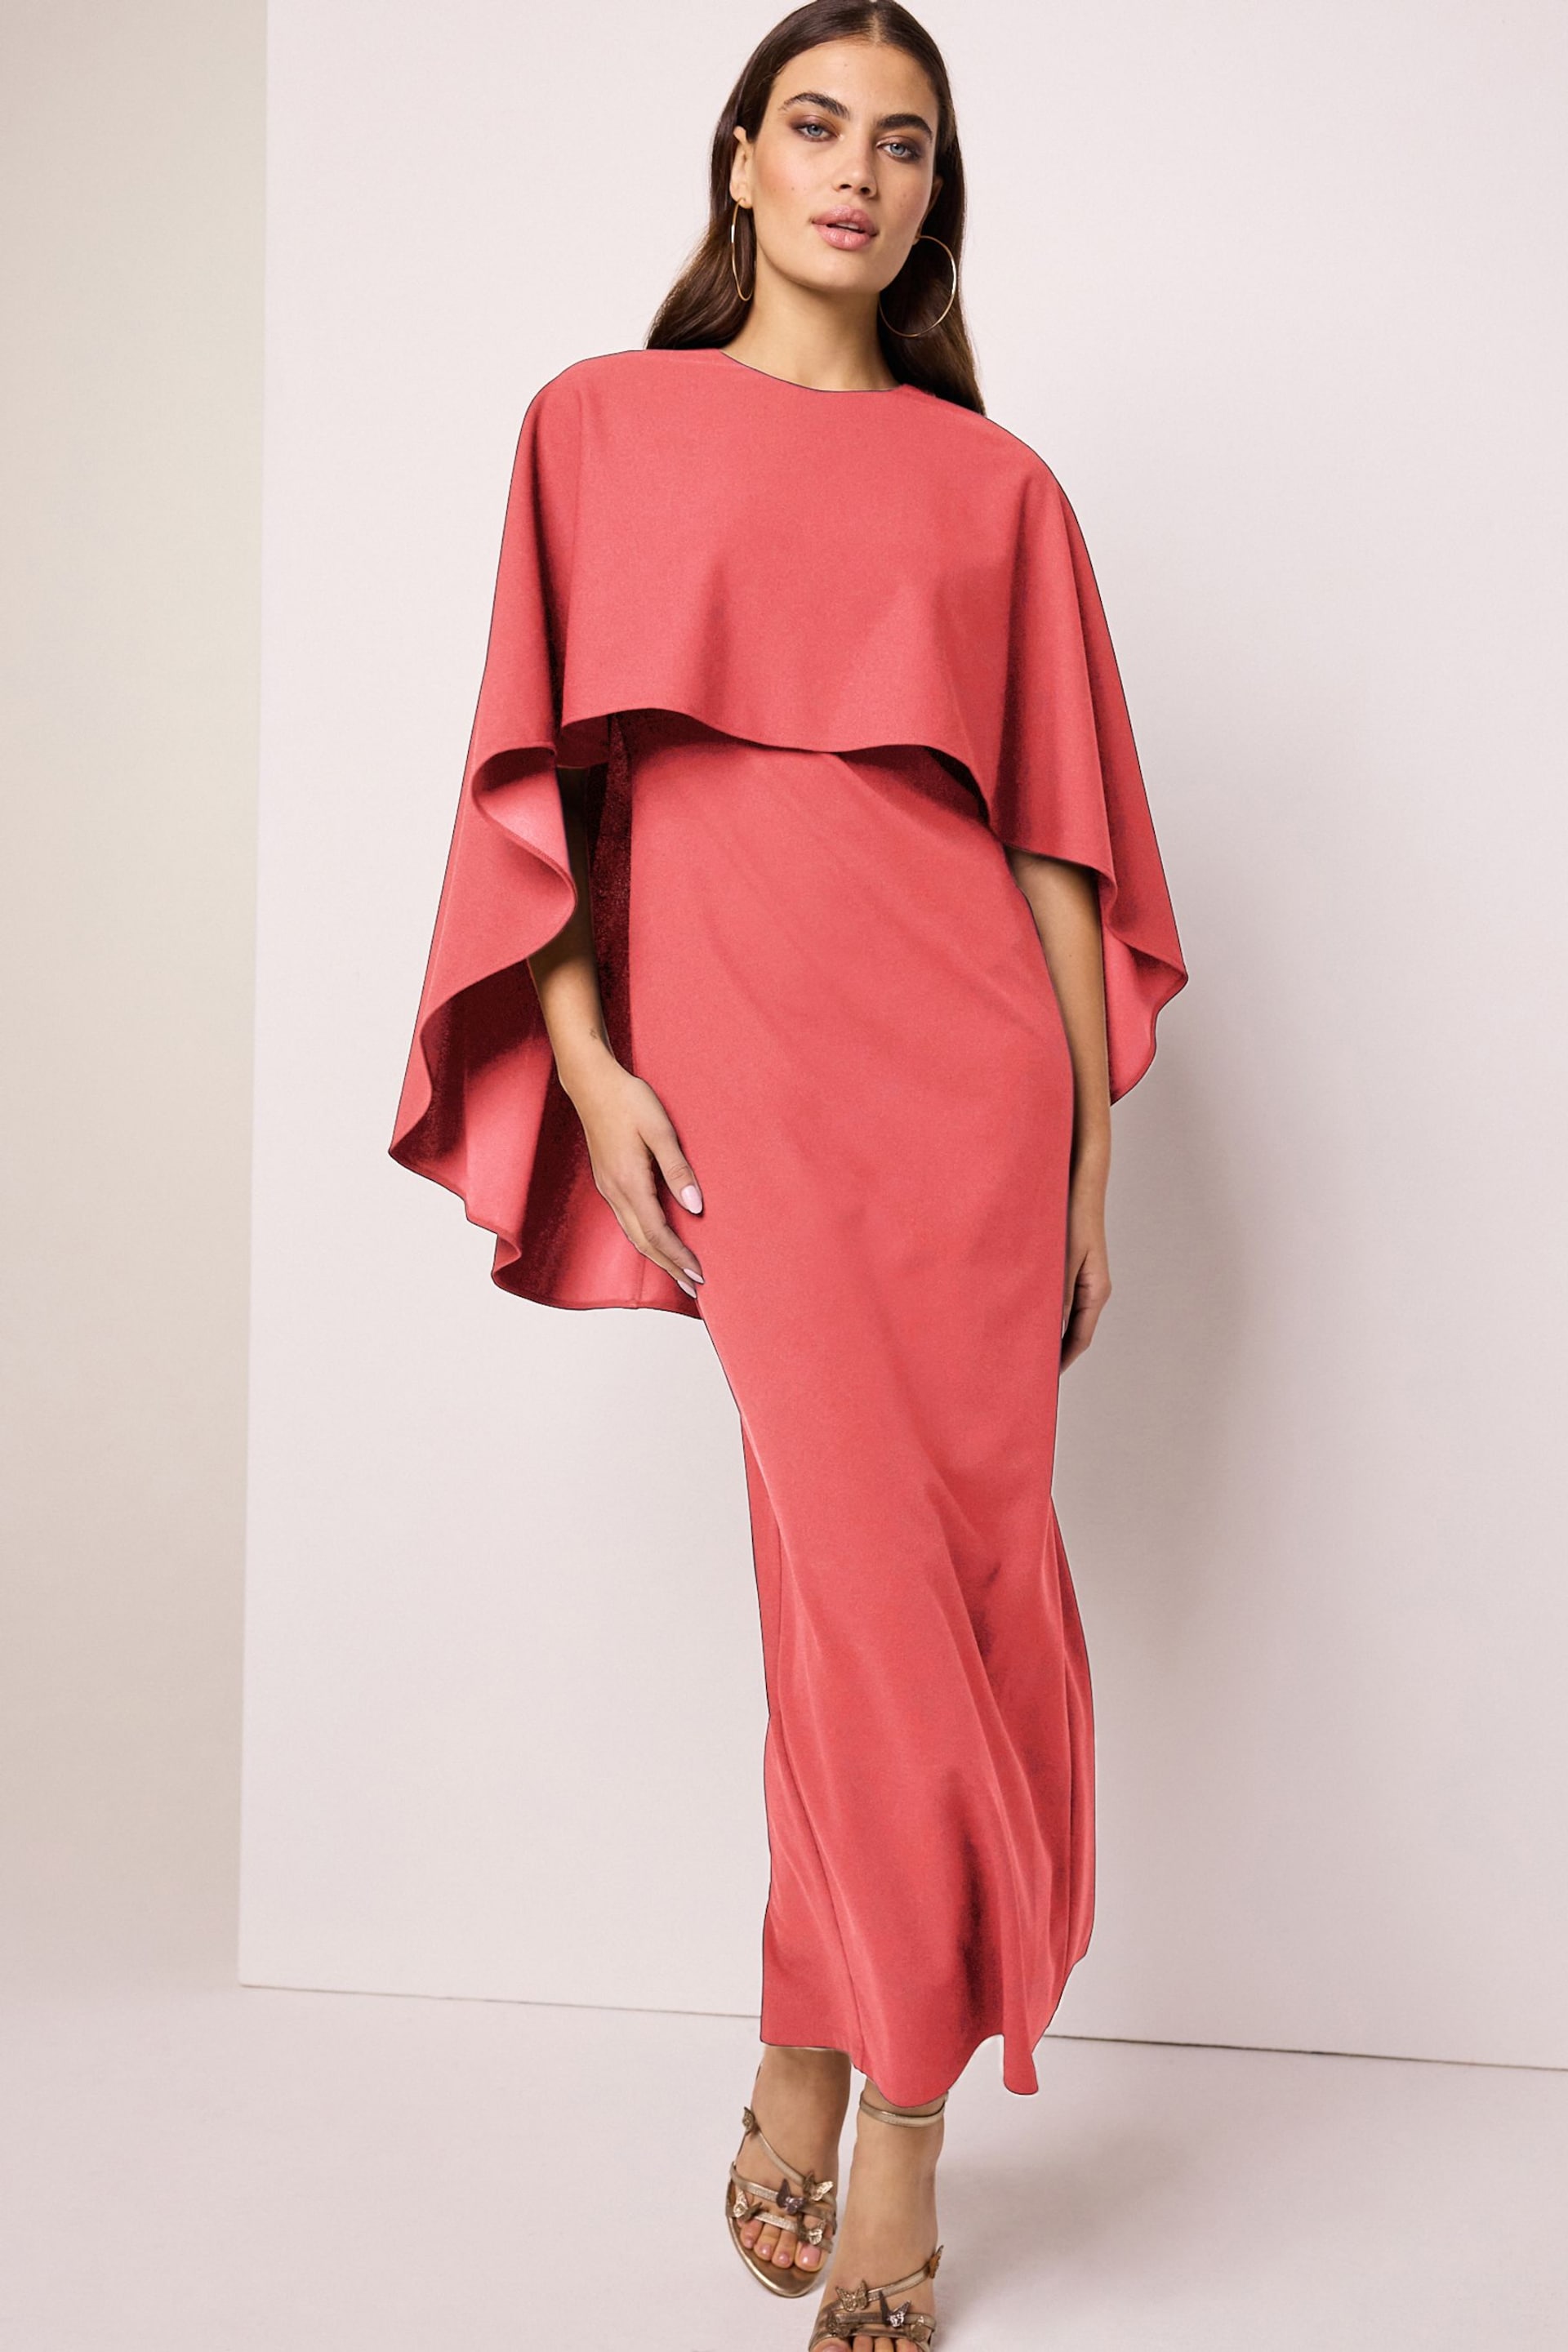 Coral Pink Cape Detail Maxi Dress - Image 1 of 5